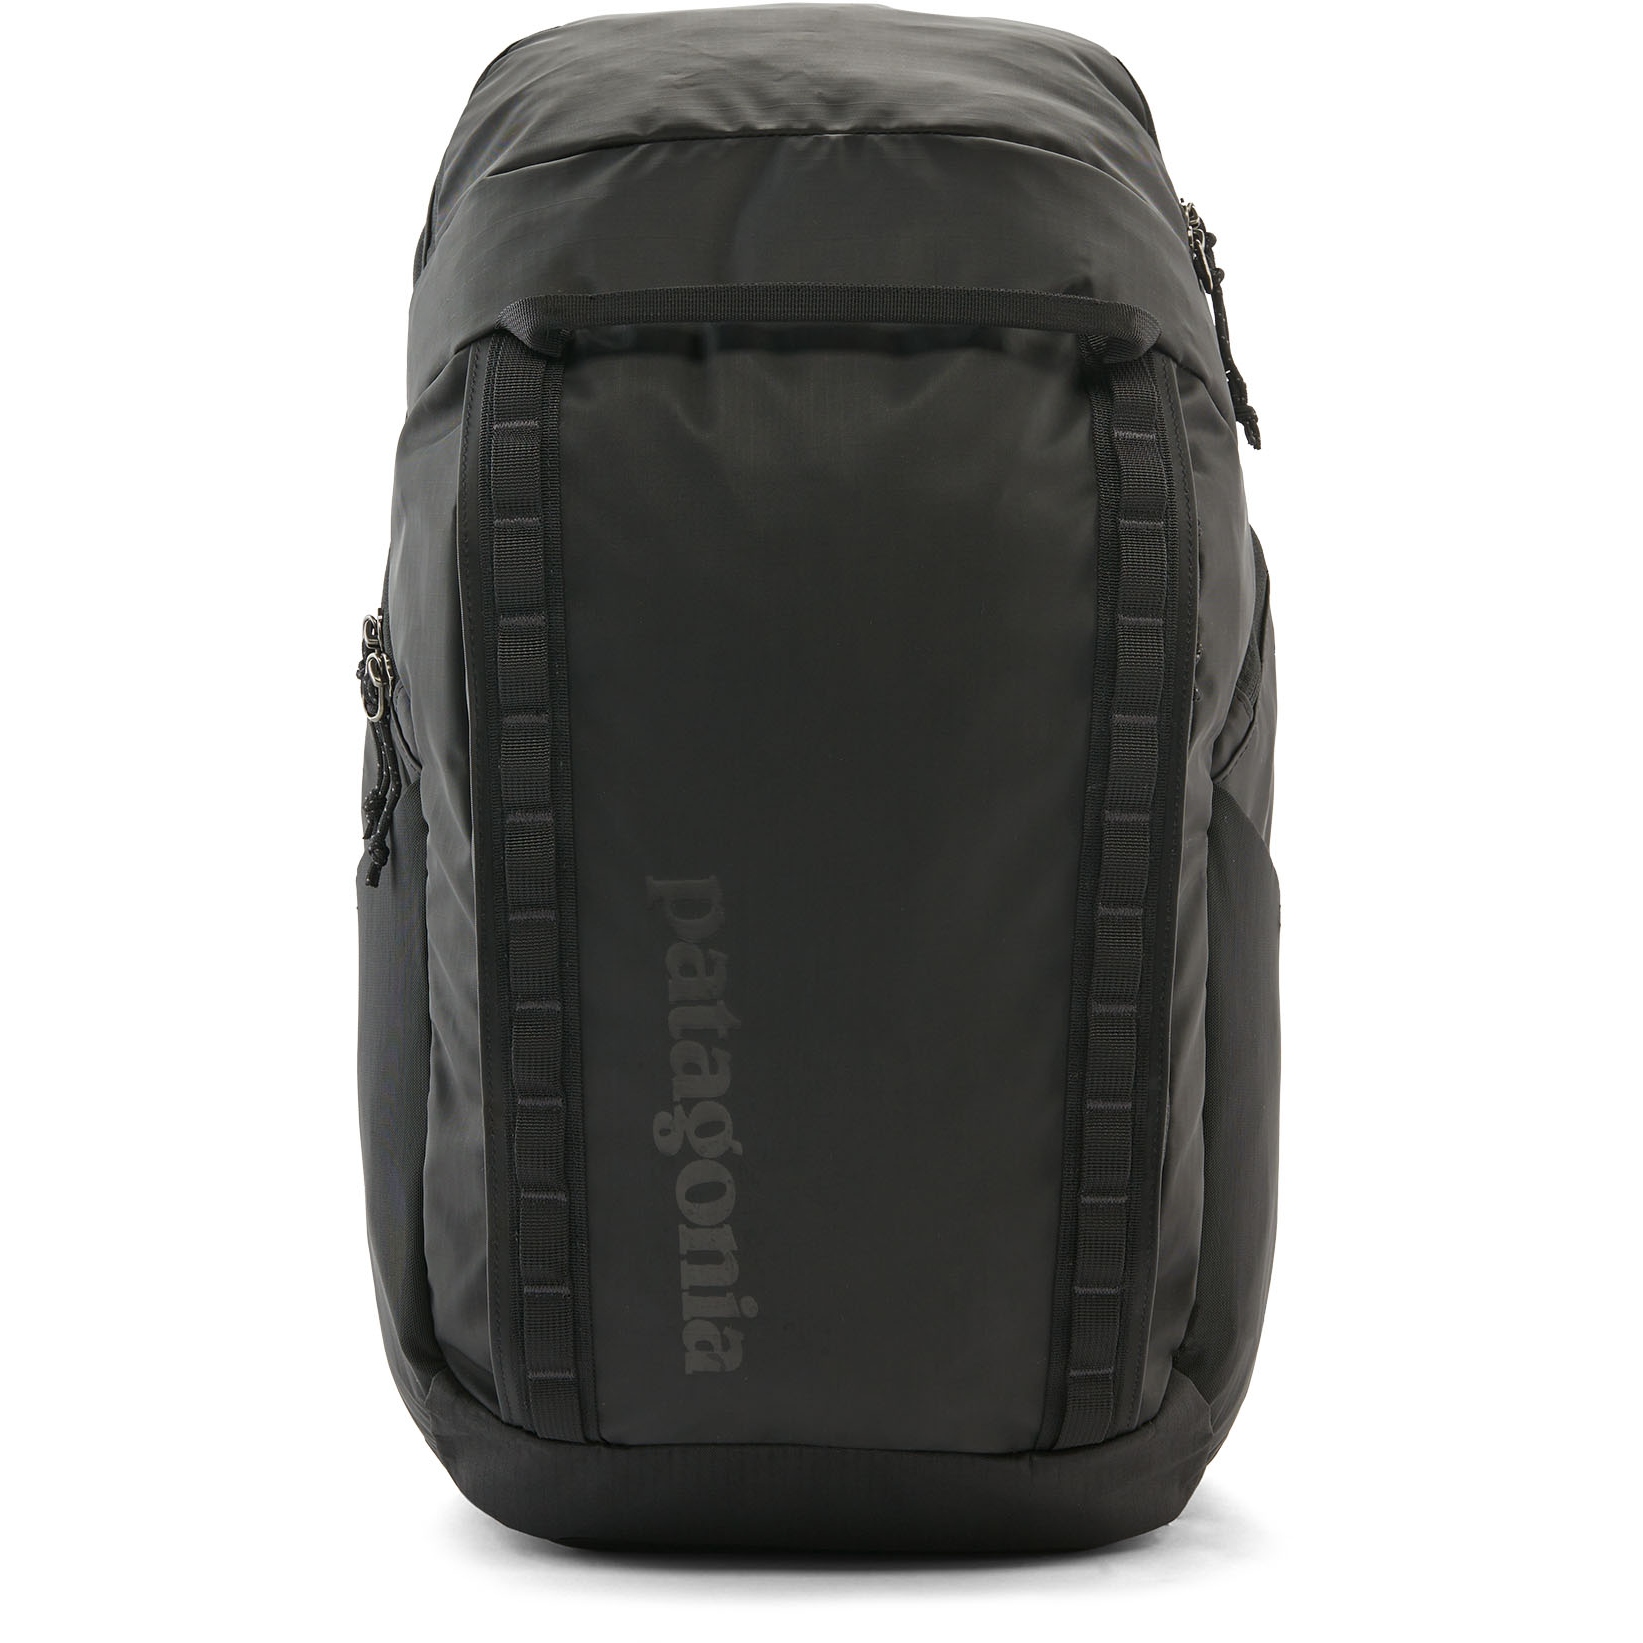 Picture of Patagonia Black Hole Pack 32L Backpack - Black